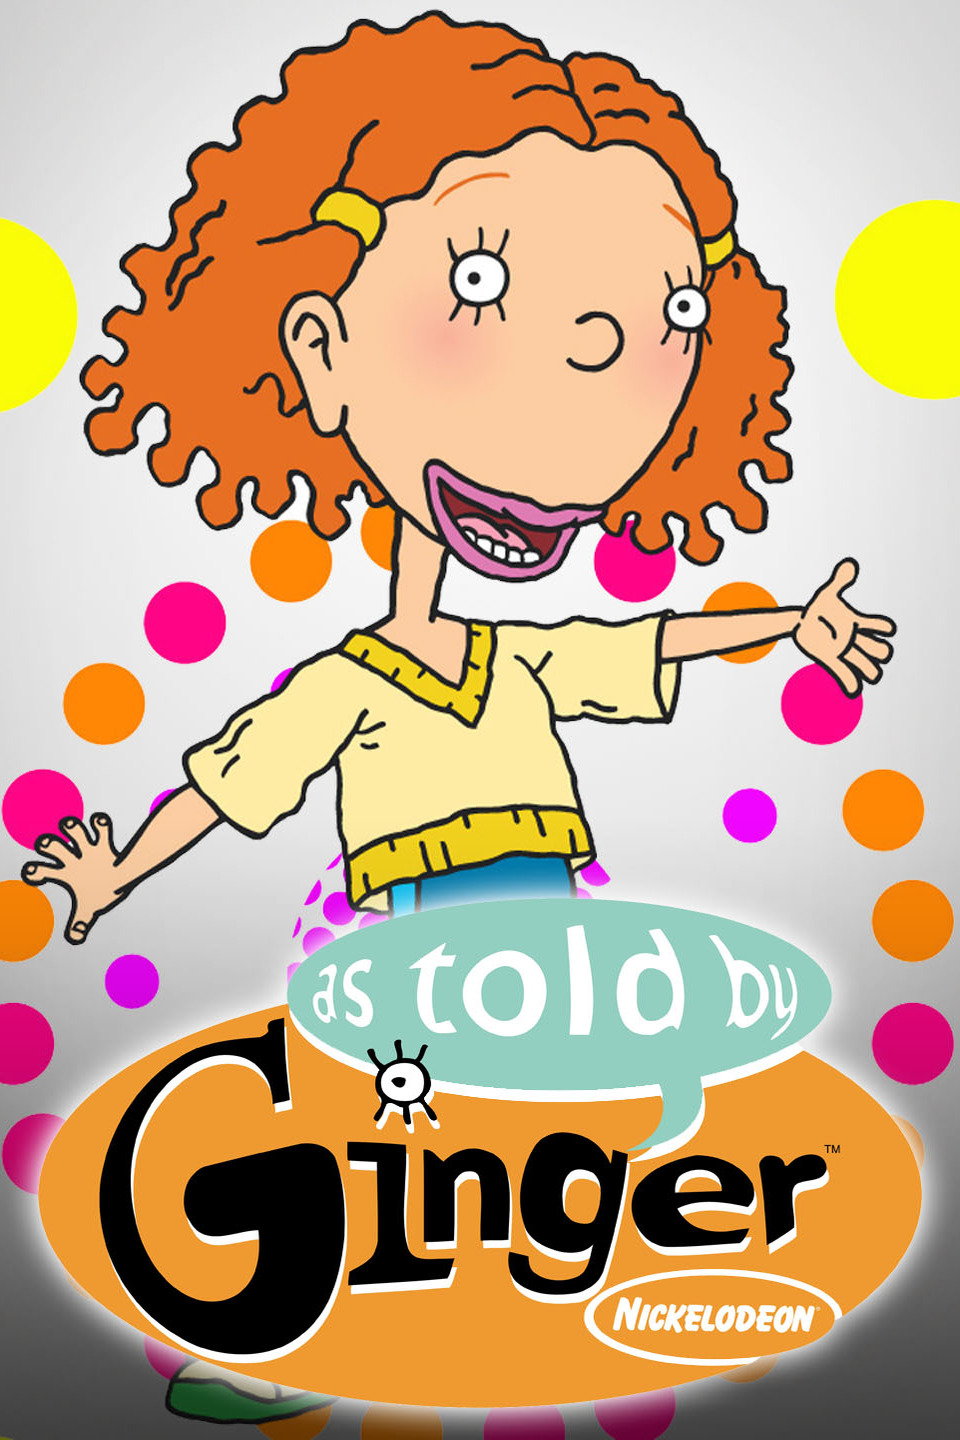 As Told by Ginger (TV Series 2000–2009) - IMDb